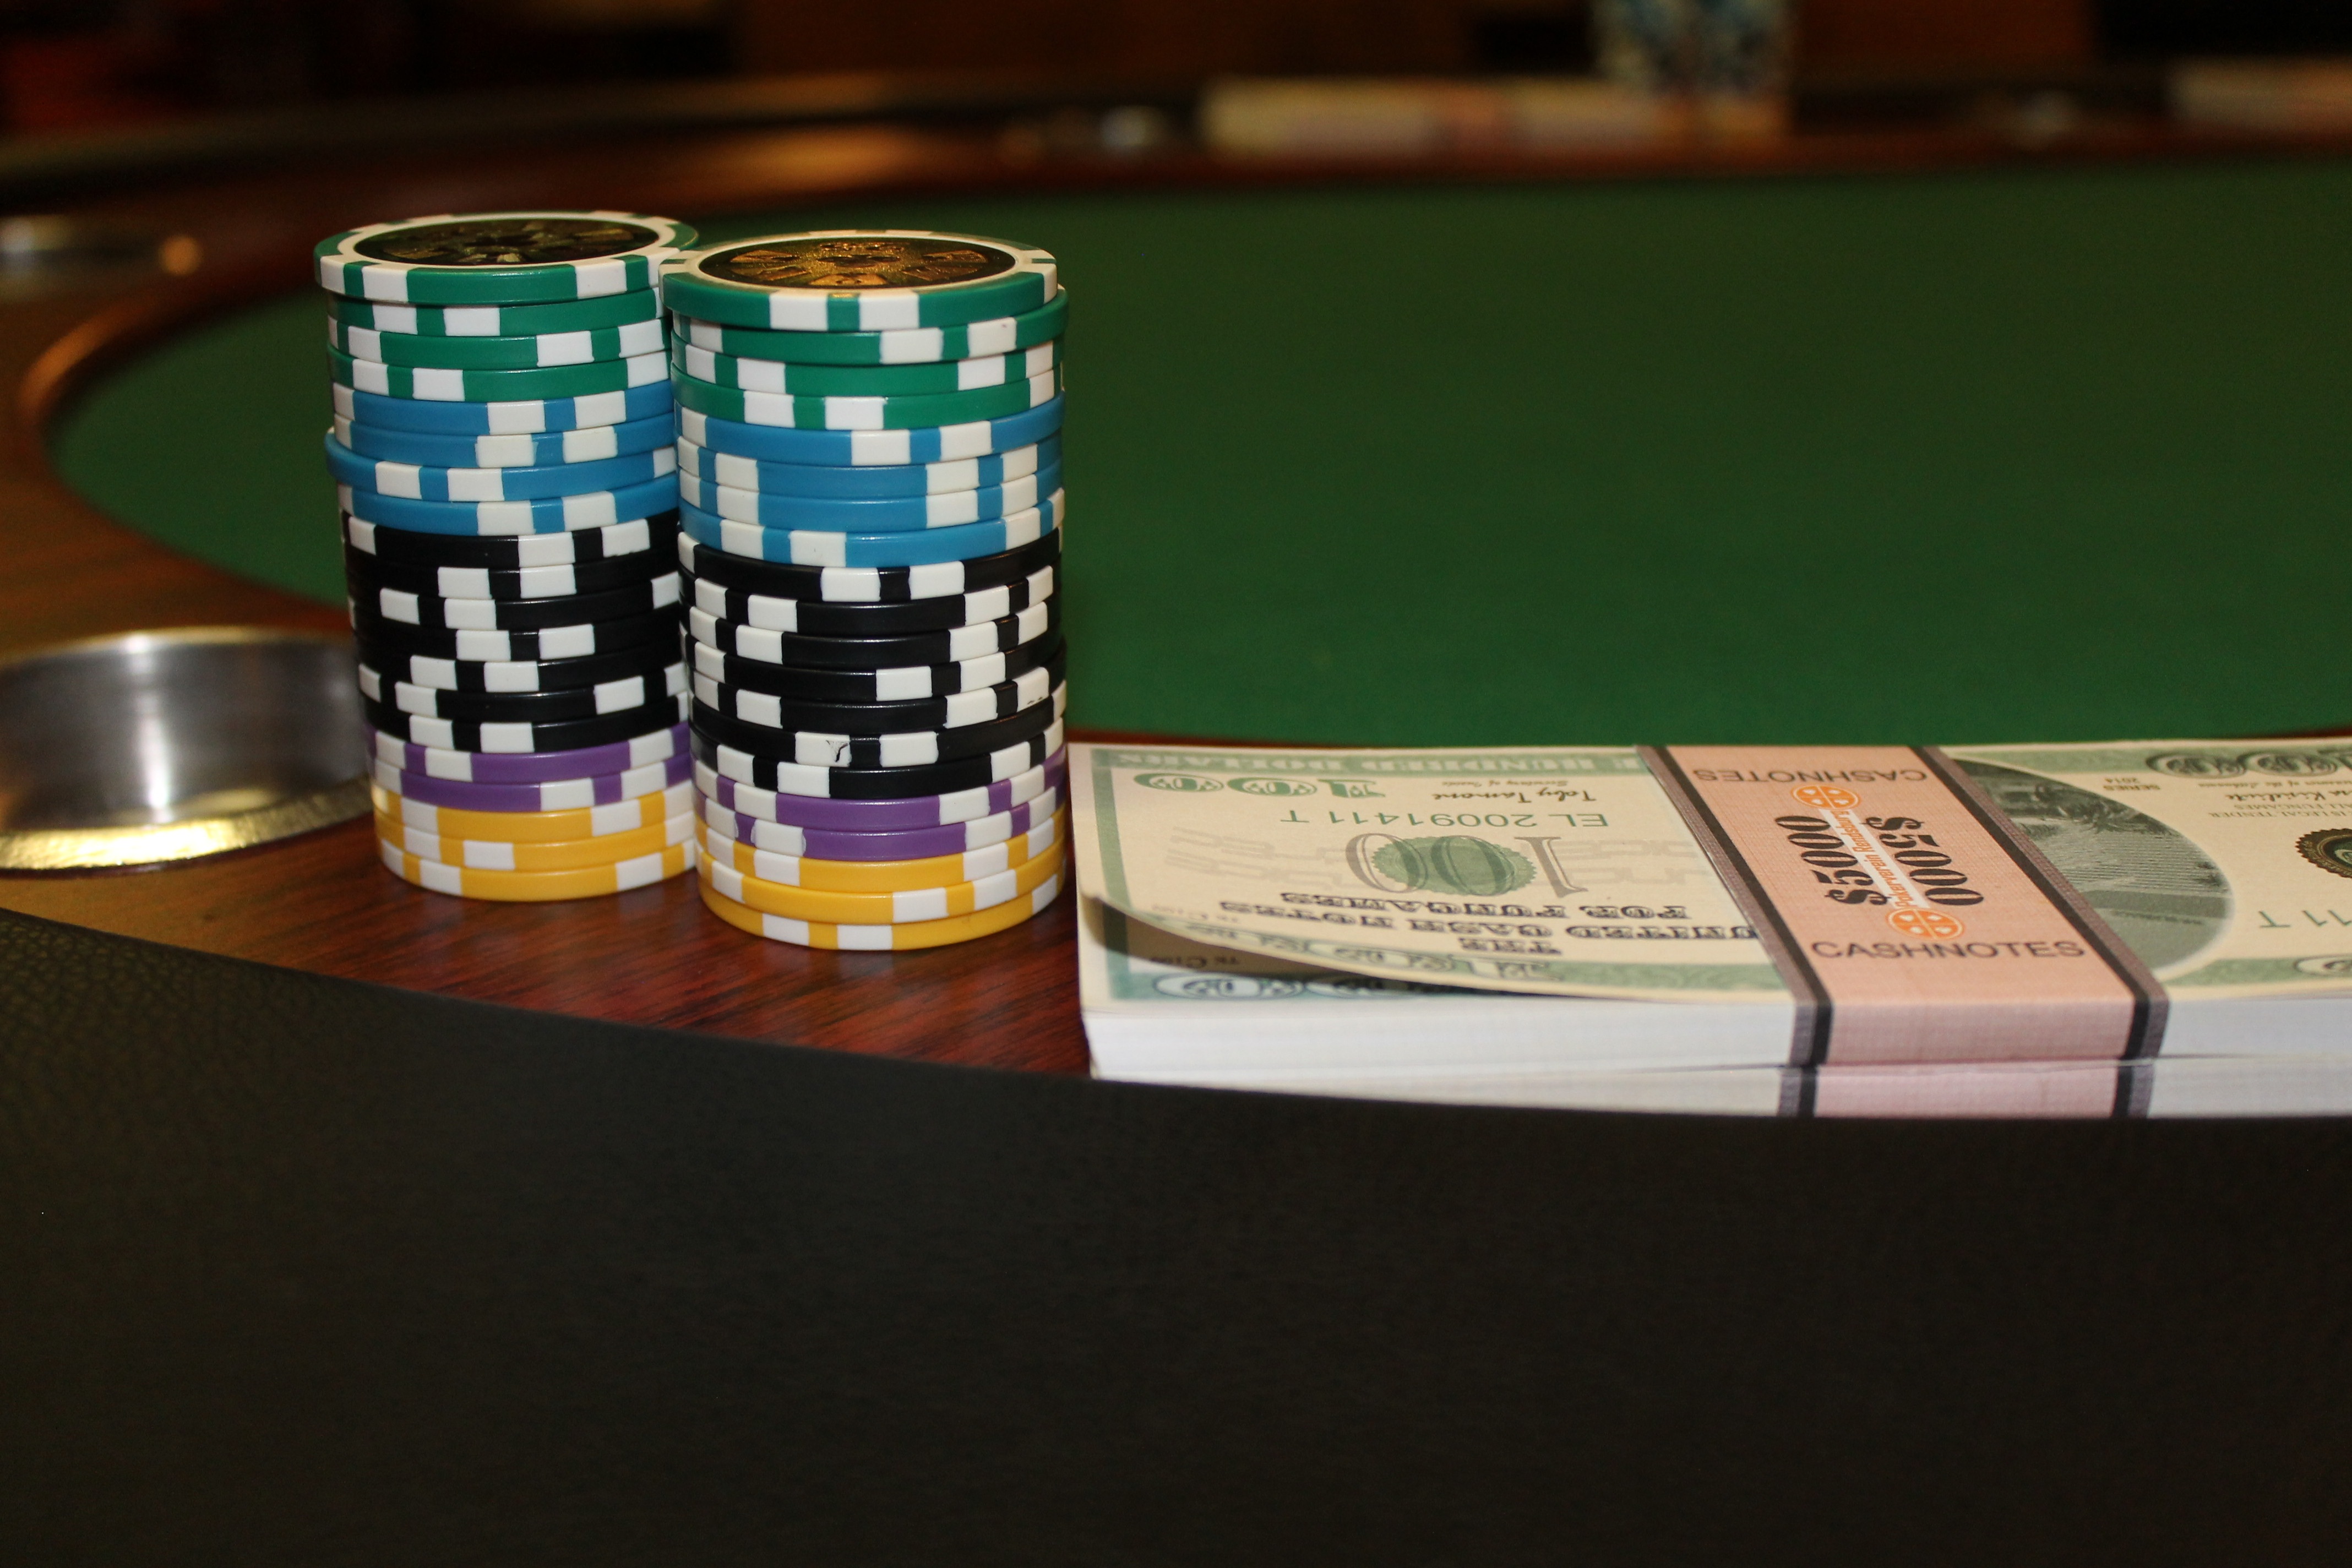 stack of poker chips beside bundle of banknotes on table, casino